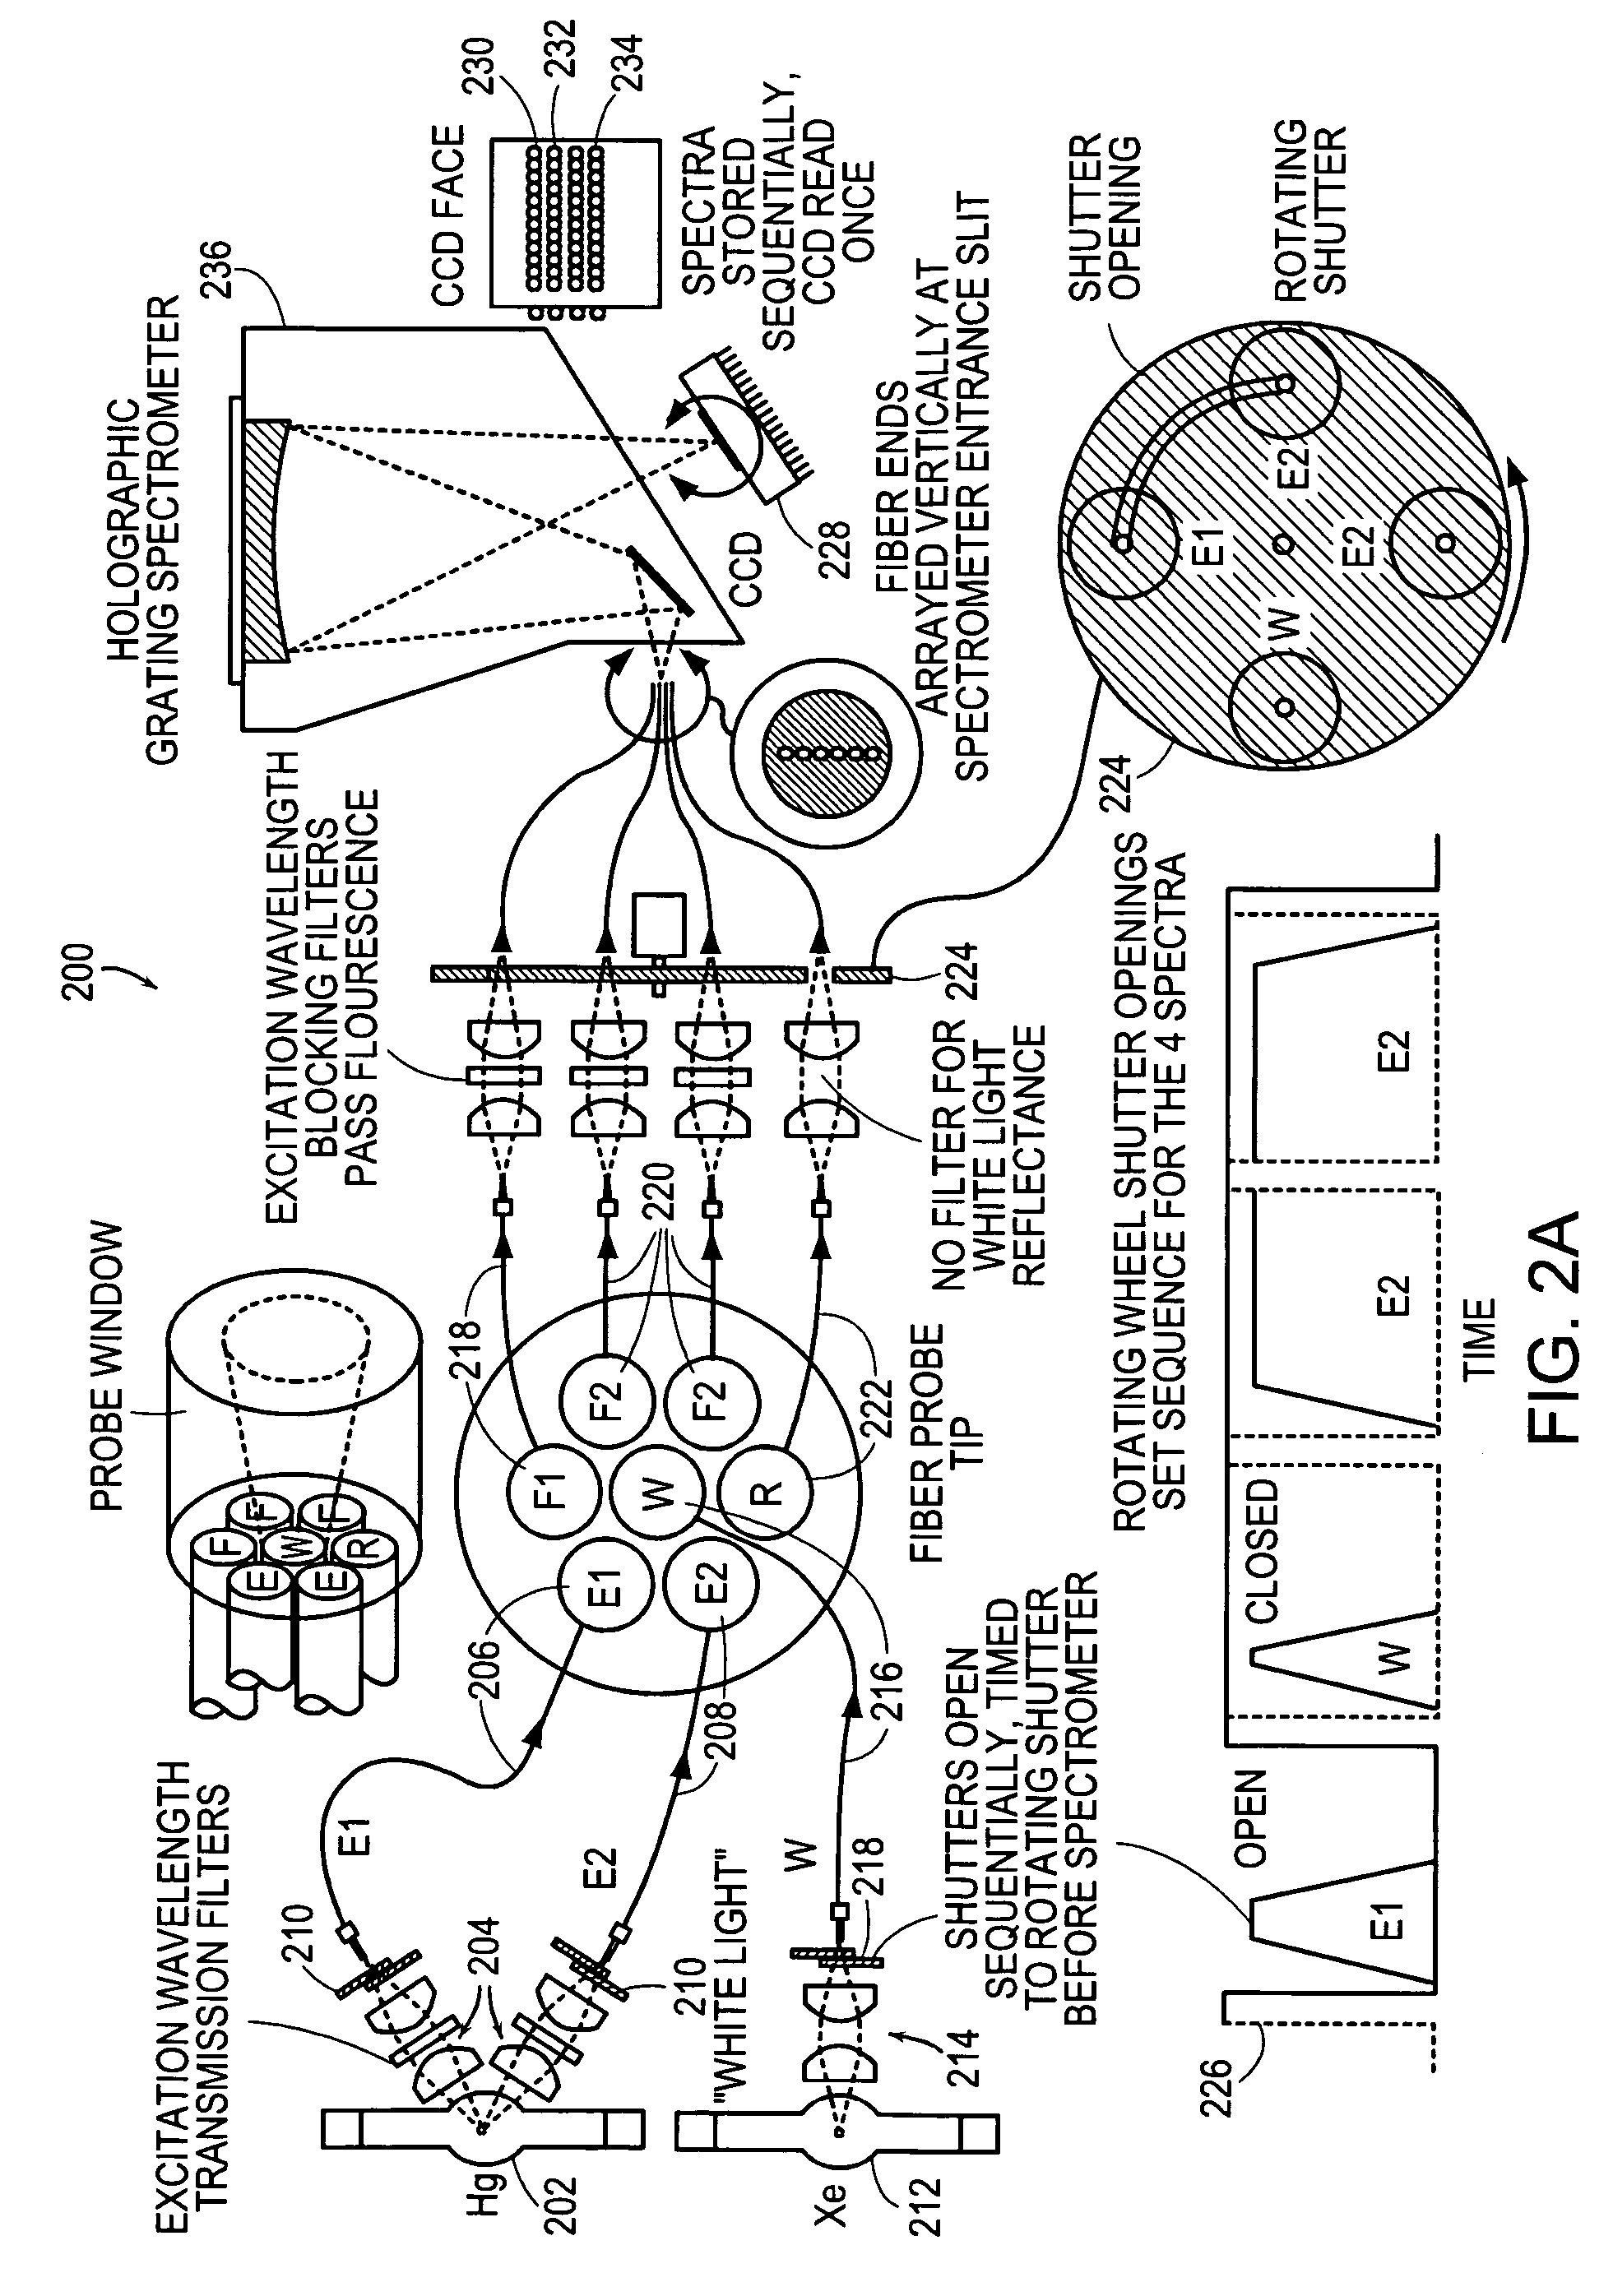 Spectroscopic diagnostic methods and system based on scattering of polarized light